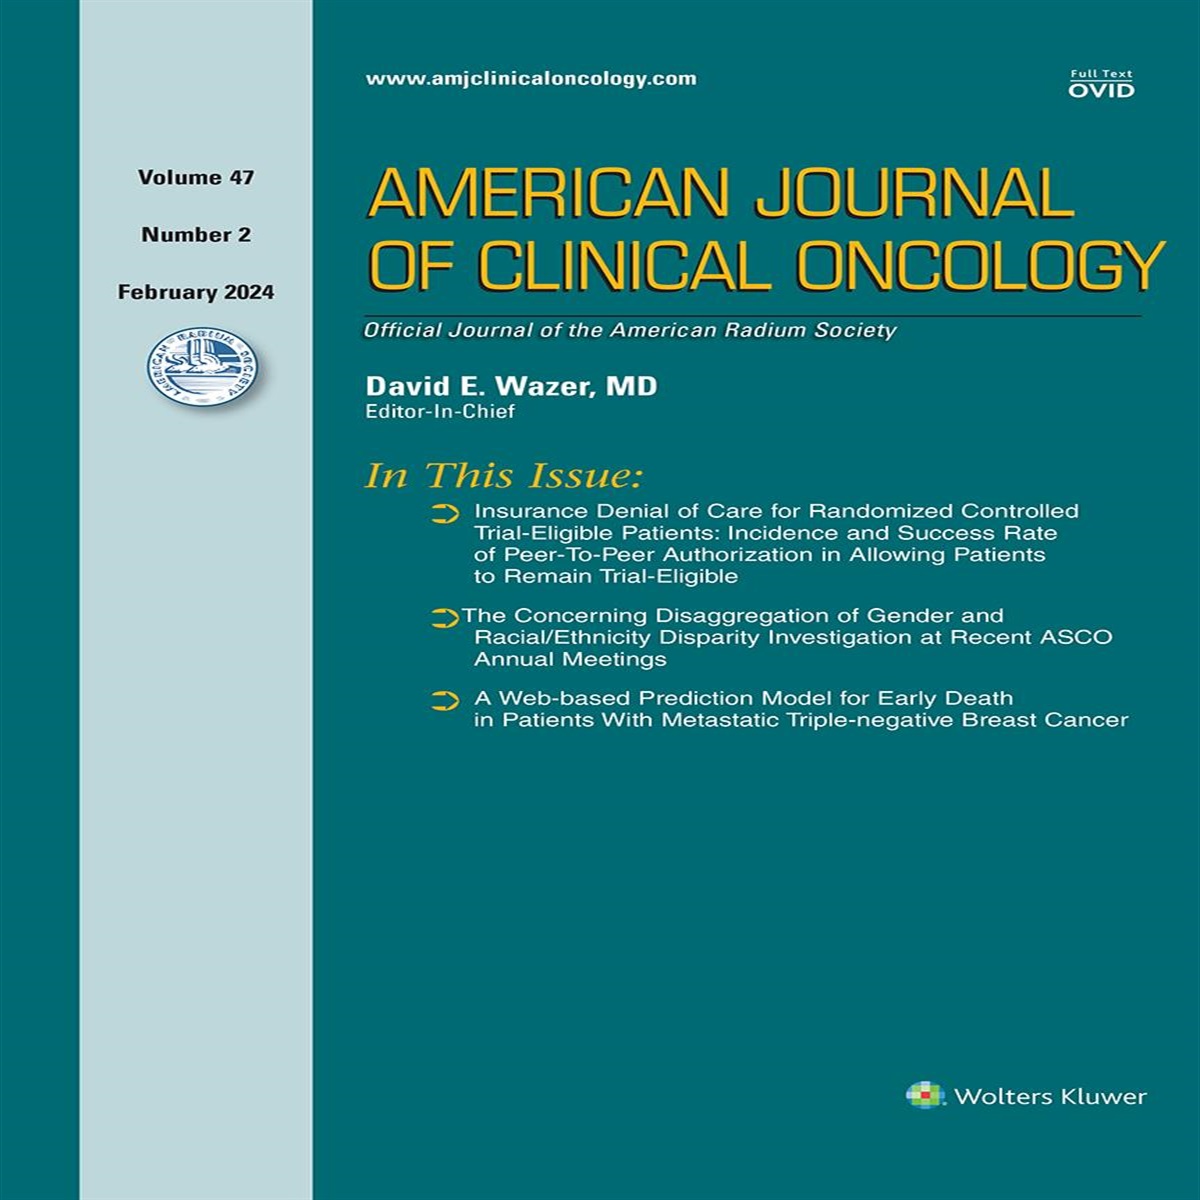 Insurance Denial of Care for Randomized Controlled Trial-Eligible Patients: Incidence and Success Rate of Peer-To-Peer Authorization in Allowing Patients to Remain Trial-Eligible